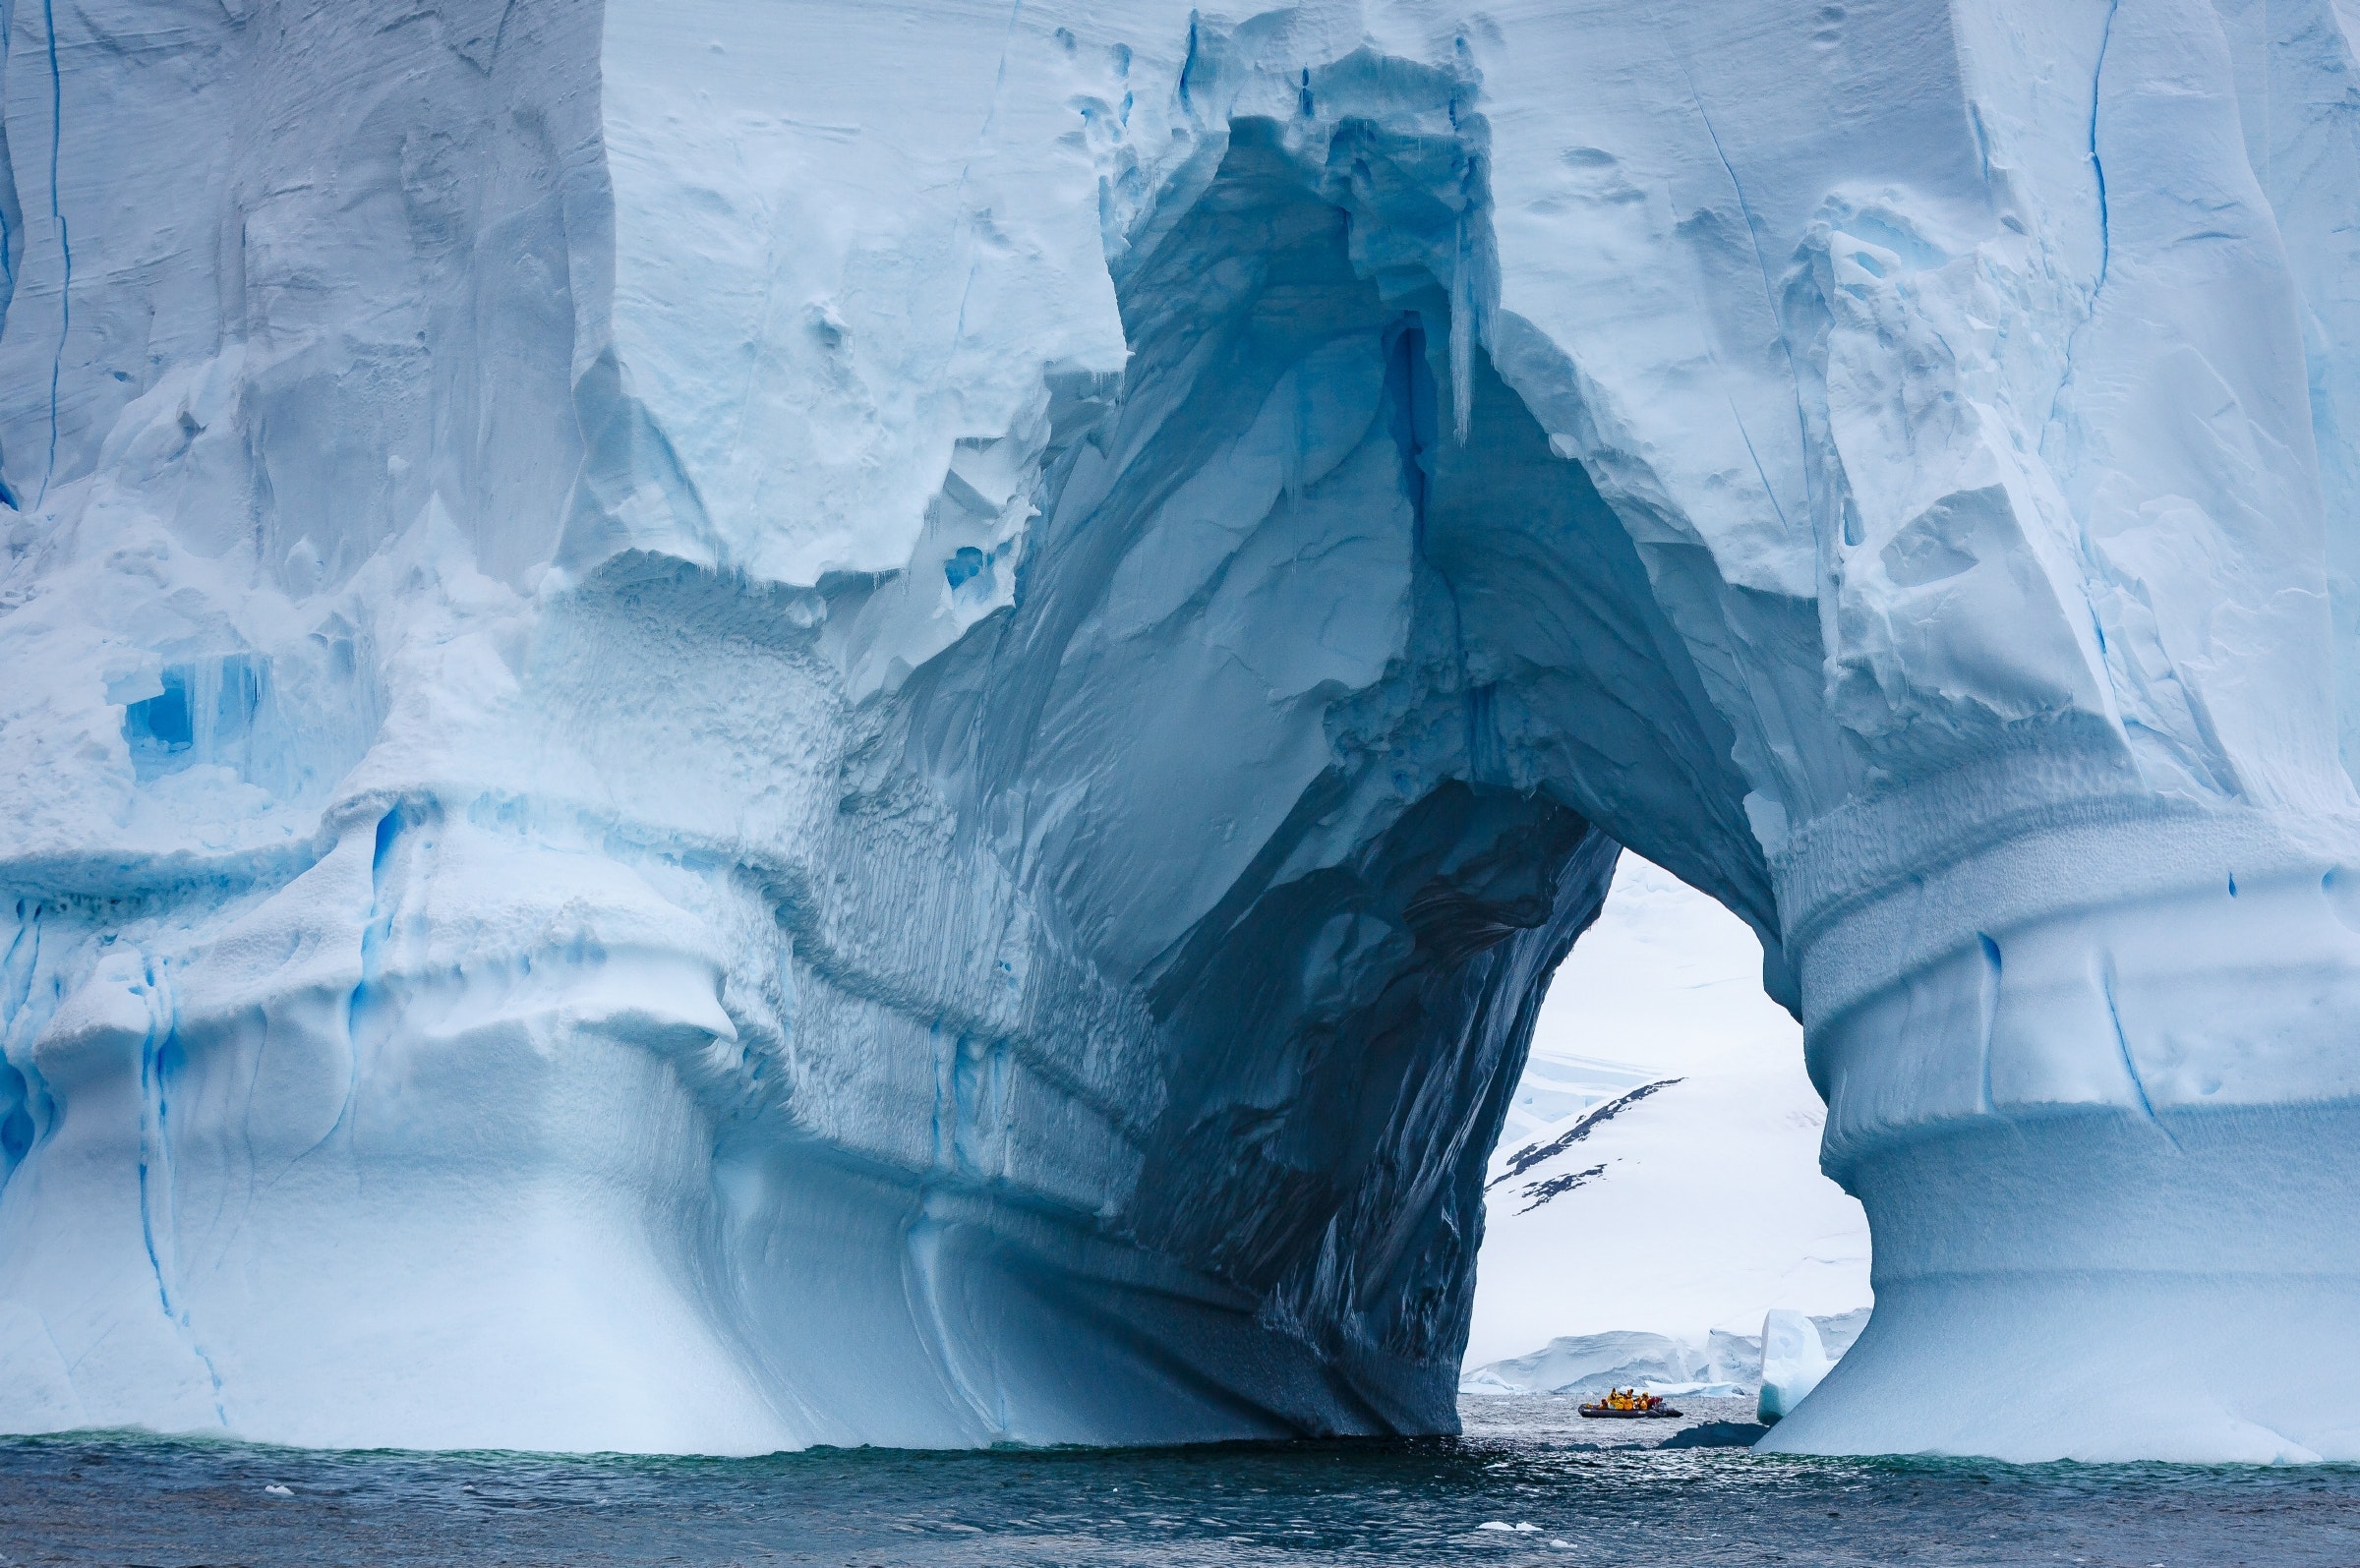 A mammoth iceberg fills the entire frame of the shot, with a natural tunnel through it revealing a zodiac boat with tourists on the other side.